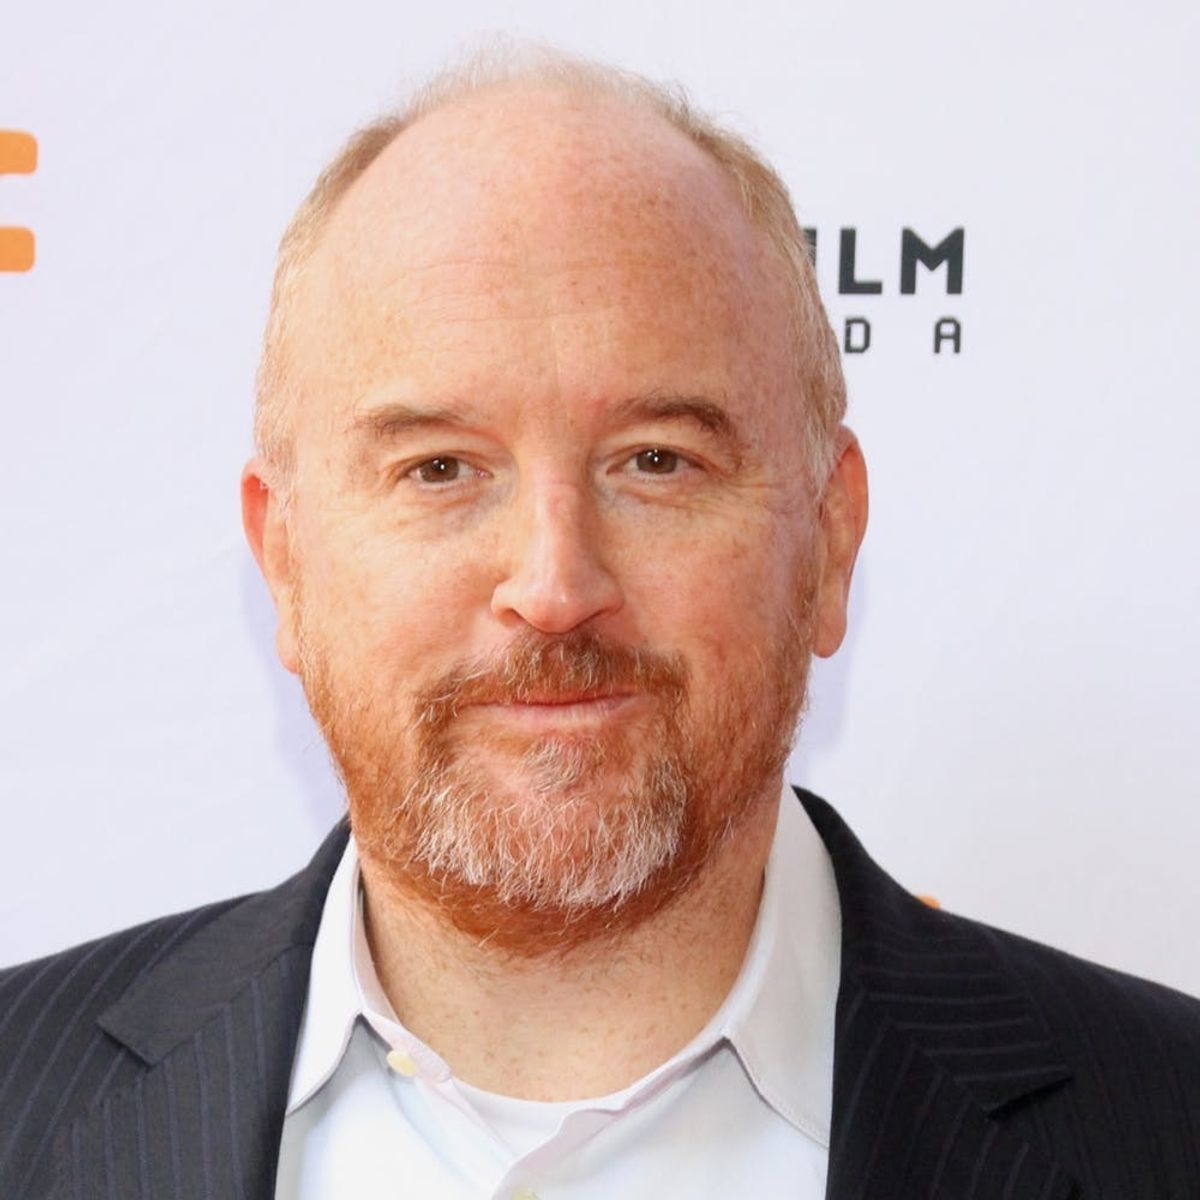 Louis C.K. Responds to Sexual Misconduct Allegations: “These Stories Are True”